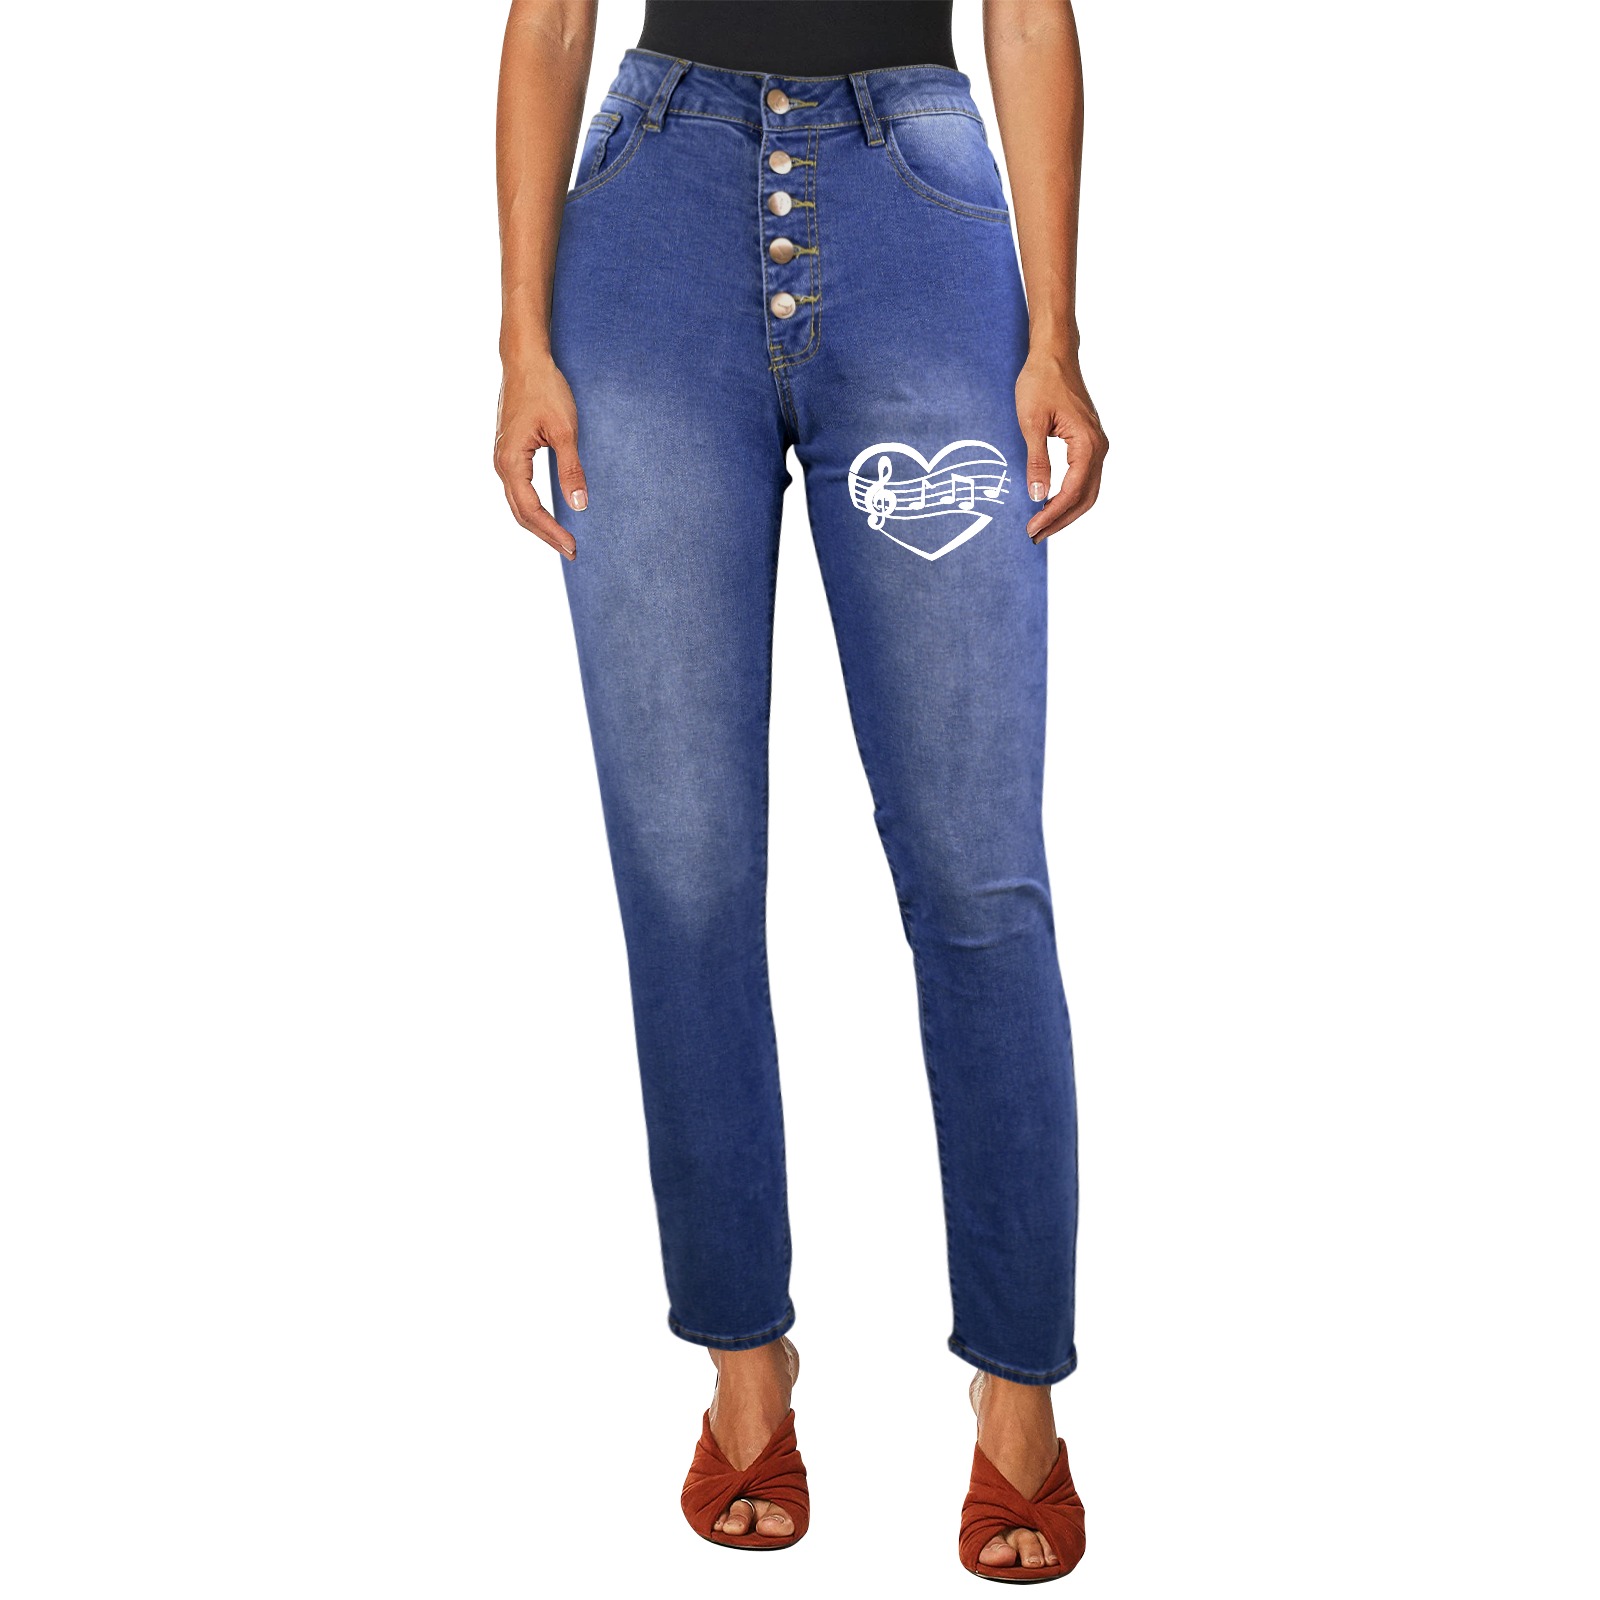 I love music, violin clef, notes, heart in white. Women's Jeans (Front Printing)